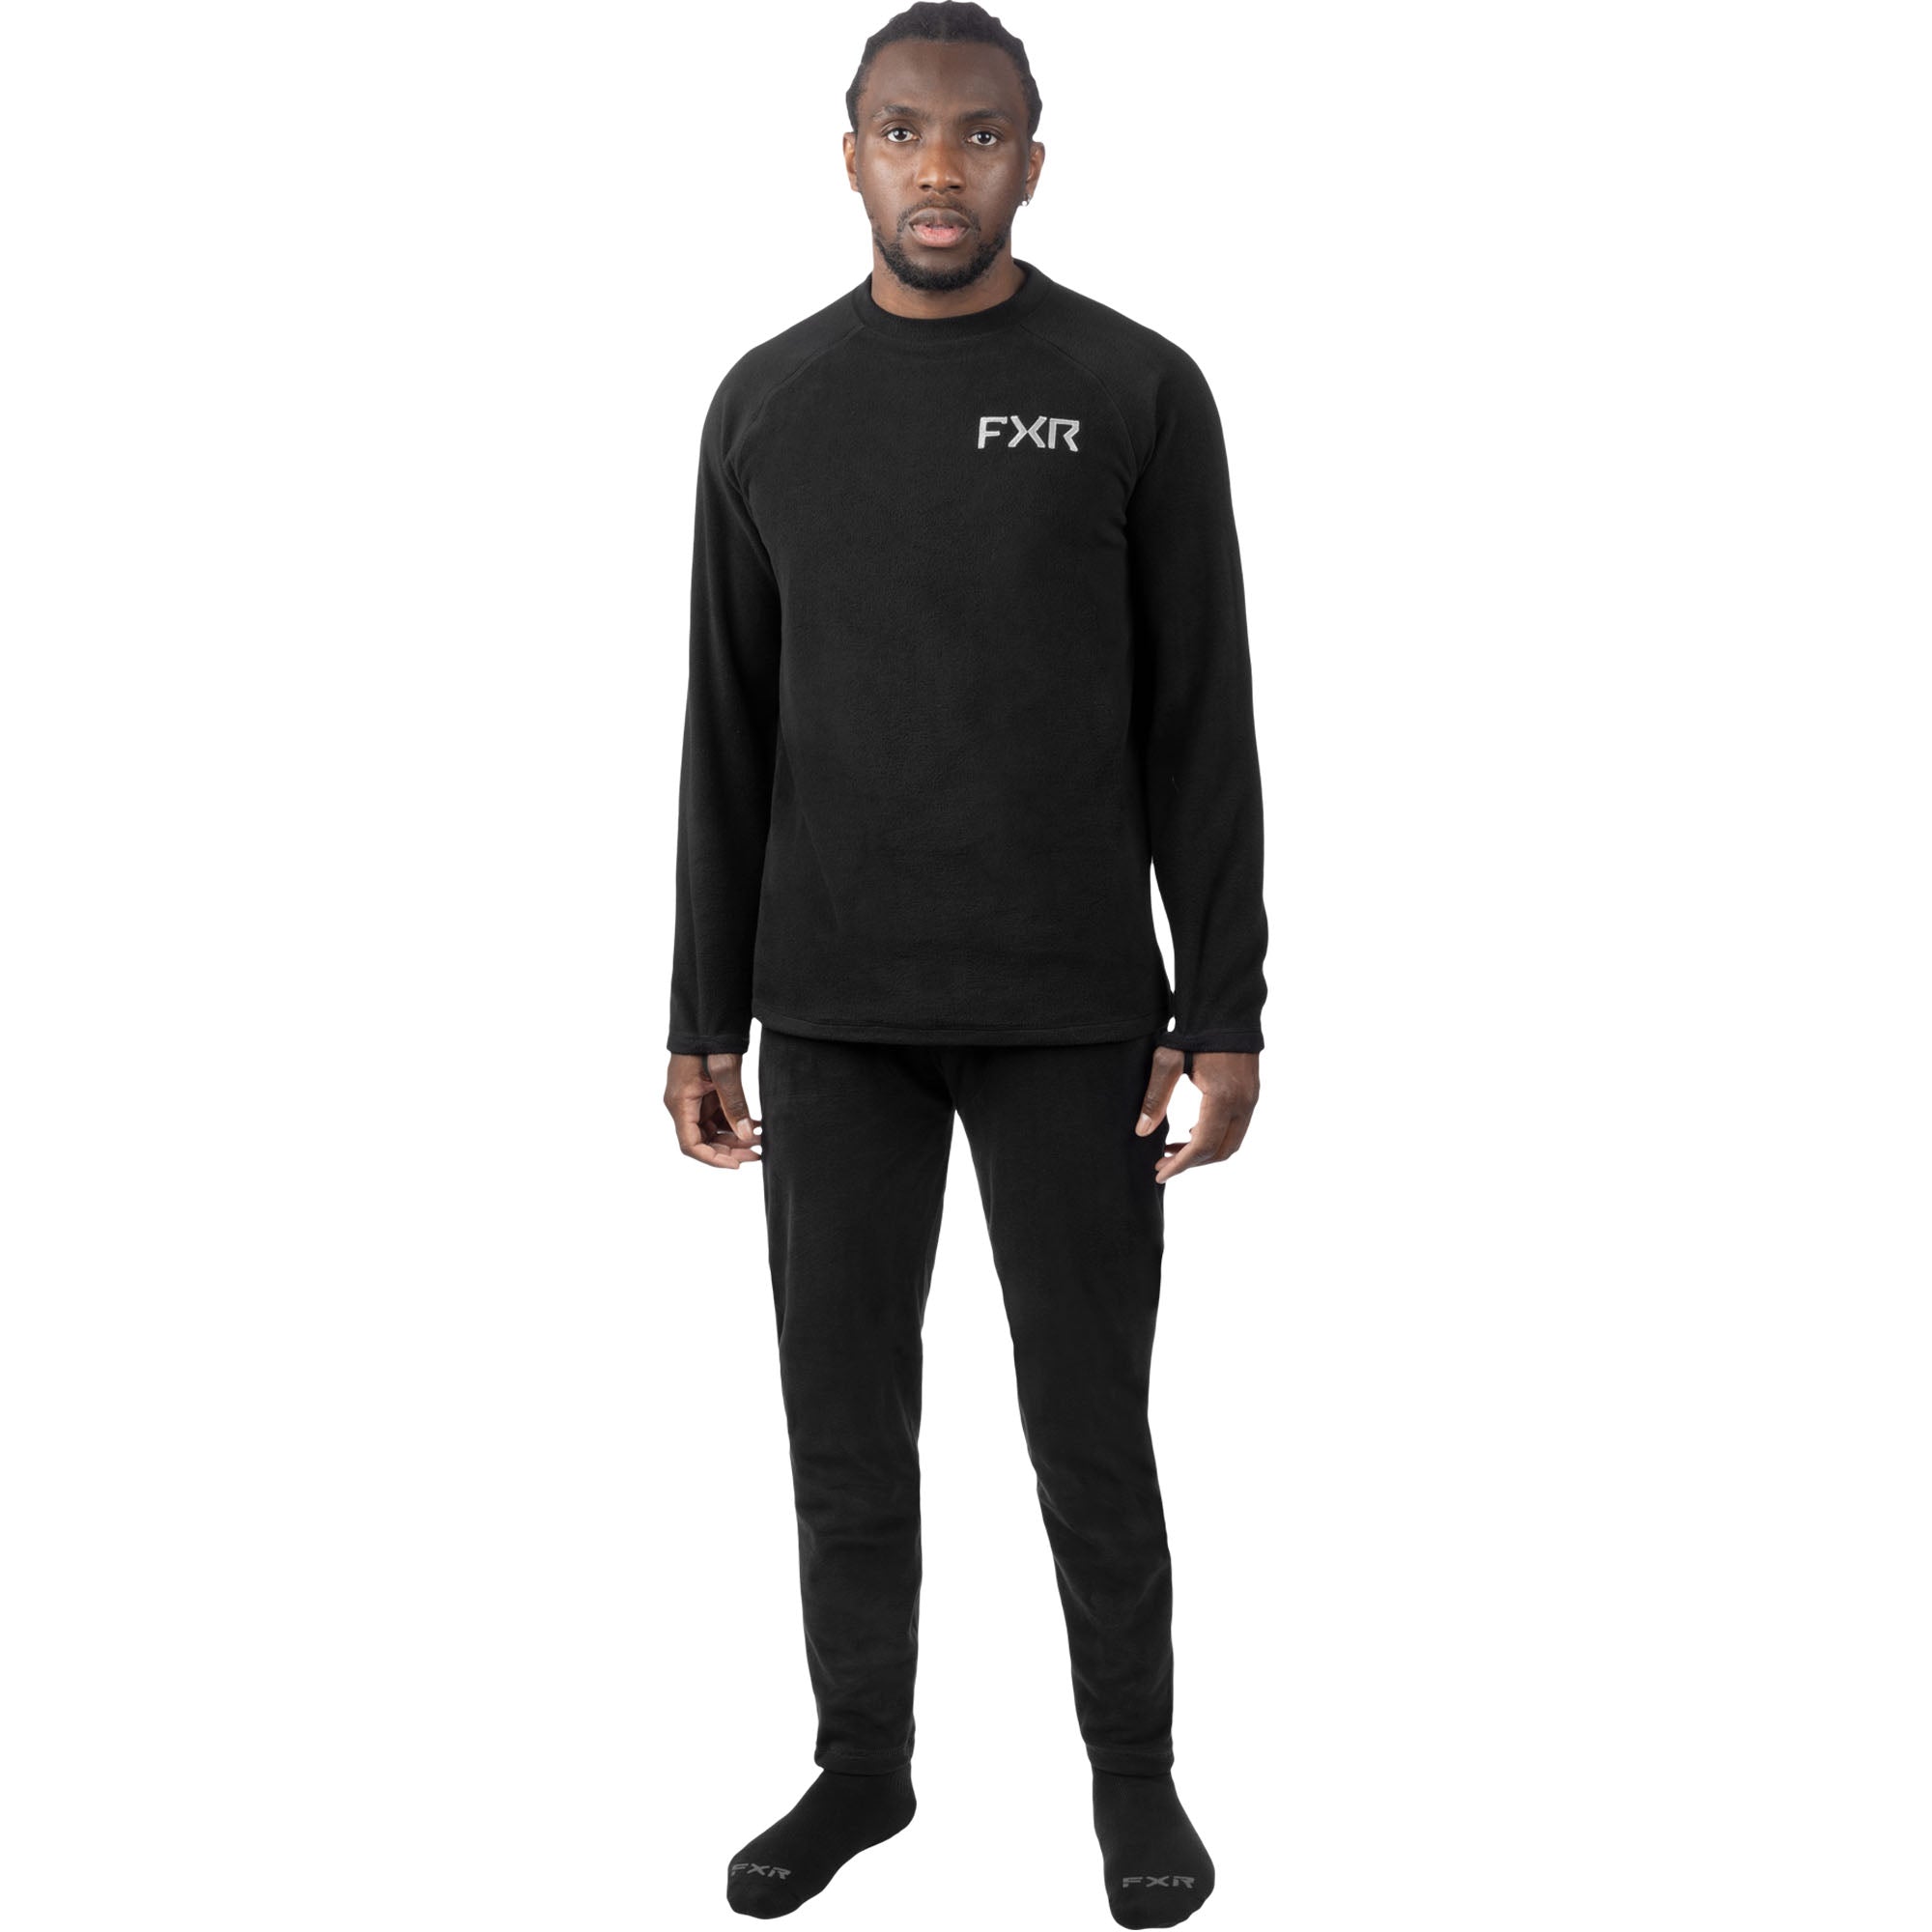 FXR  Mens Pyro Thermal Long Sleeve Base Layer Moisture Wicking Warm Comfy Black